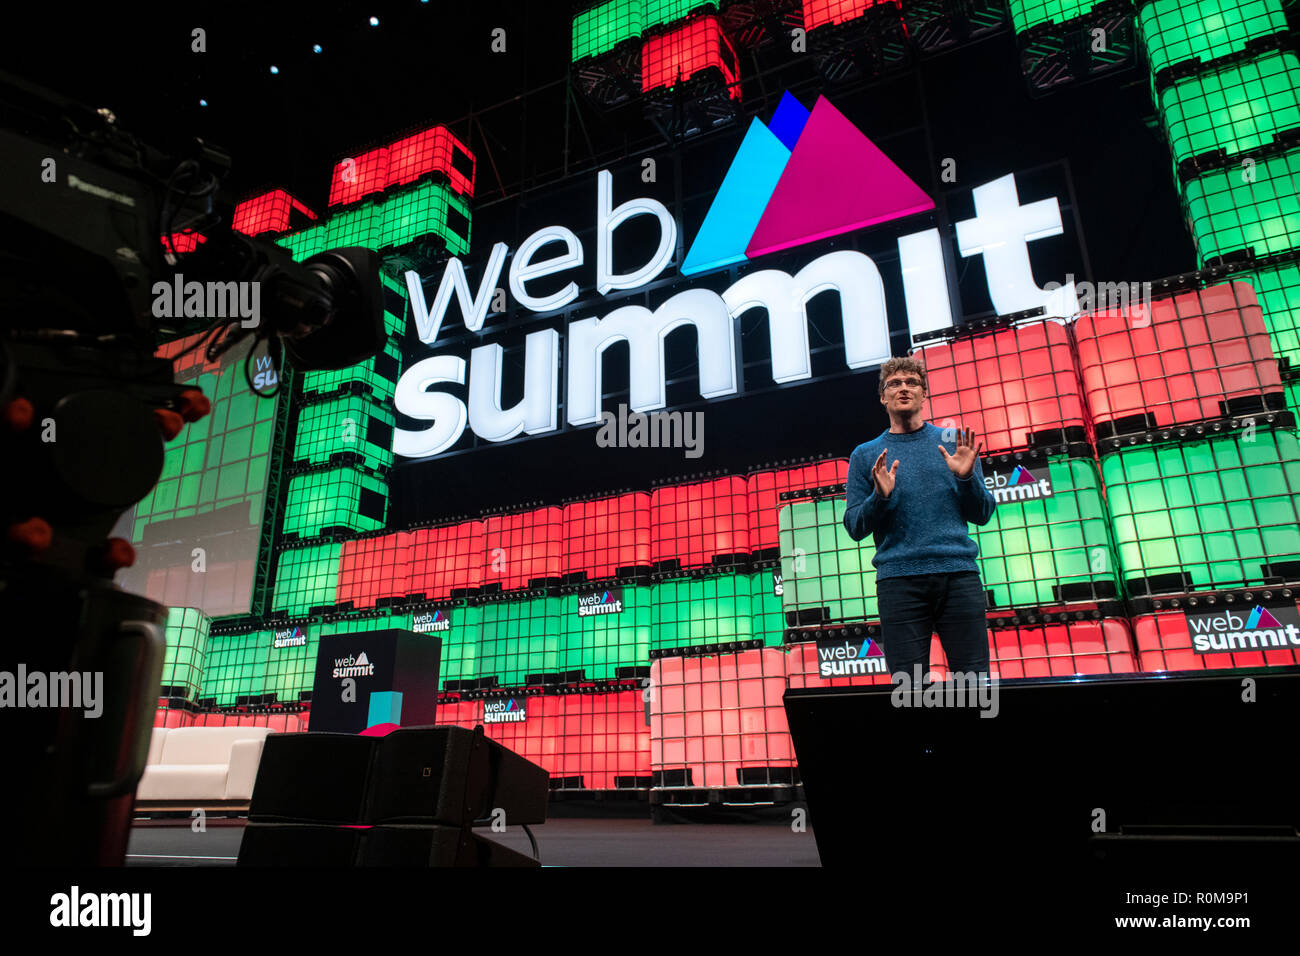 Founder and CEO of Web Summit Paddy Cosgrave is seen addressing to the audience at Altice Arena Centre Stage, in Lisbon, during the opening ceremony of the Web Summit 2018.  The 10th edition of the Web Summit has begun in Lisbon. This is one of the largest technology conferences in the world and also a meeting point for the debate on technological evolution in people's lives. This year, around 70.000 participants are expected to attend the Web Summit. Stock Photo